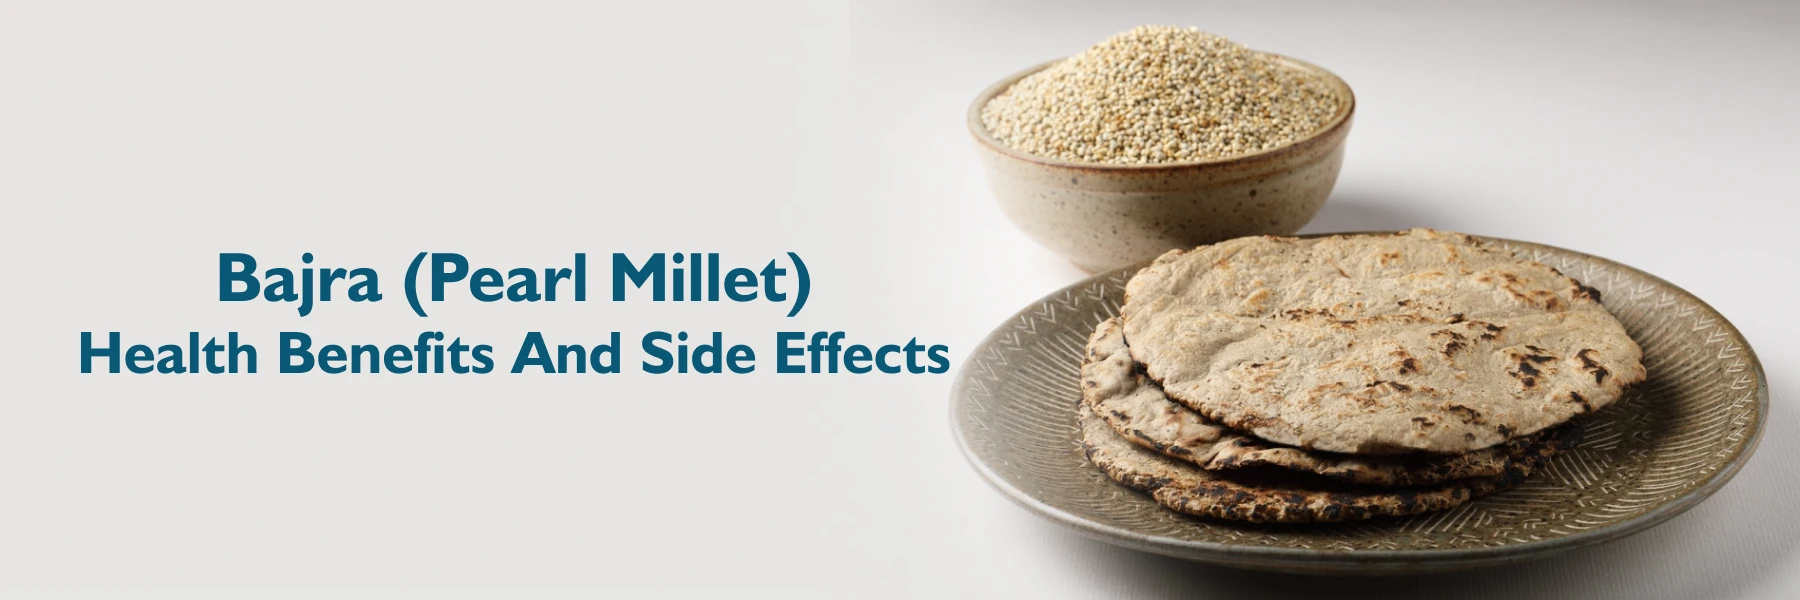 Bajra (Pearl Millet) And Its Benefits